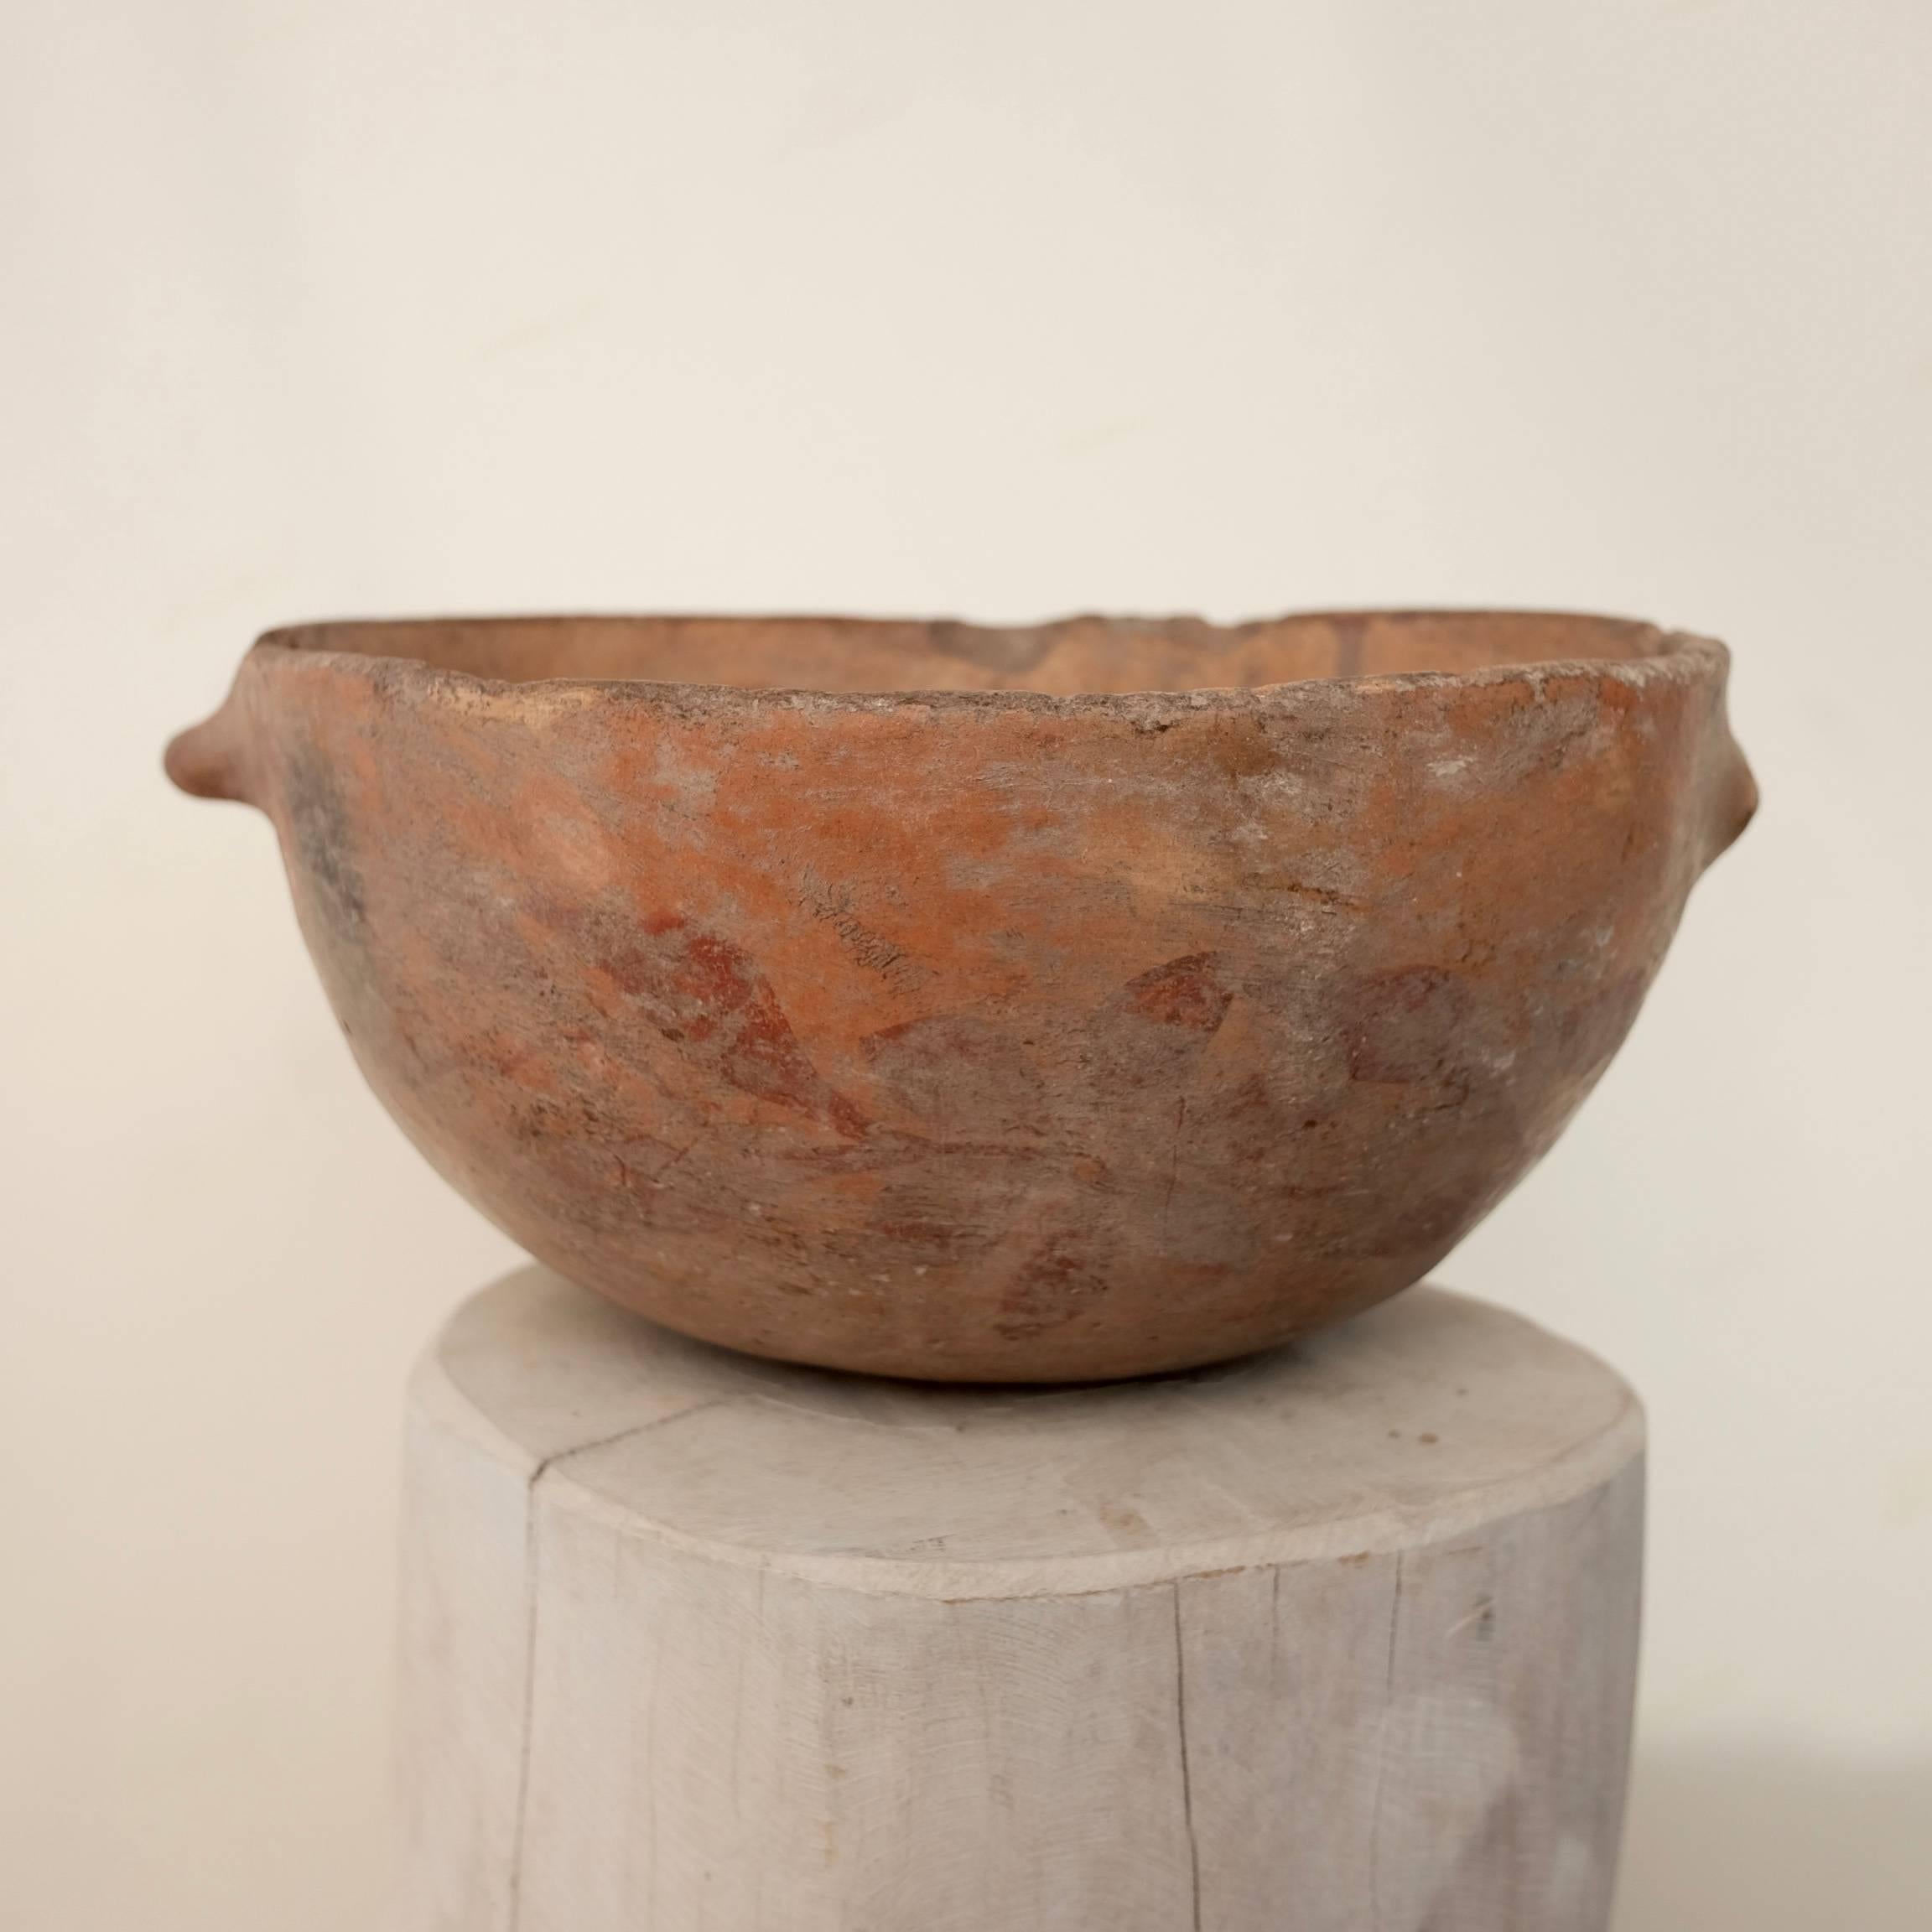 Light brown Siena colored functional bowl from the Zitlala region of Guerrero. One of the handles was damaged many years ago however given the wear of the damaged area, there is hardly any loss of aesthetic appeal.